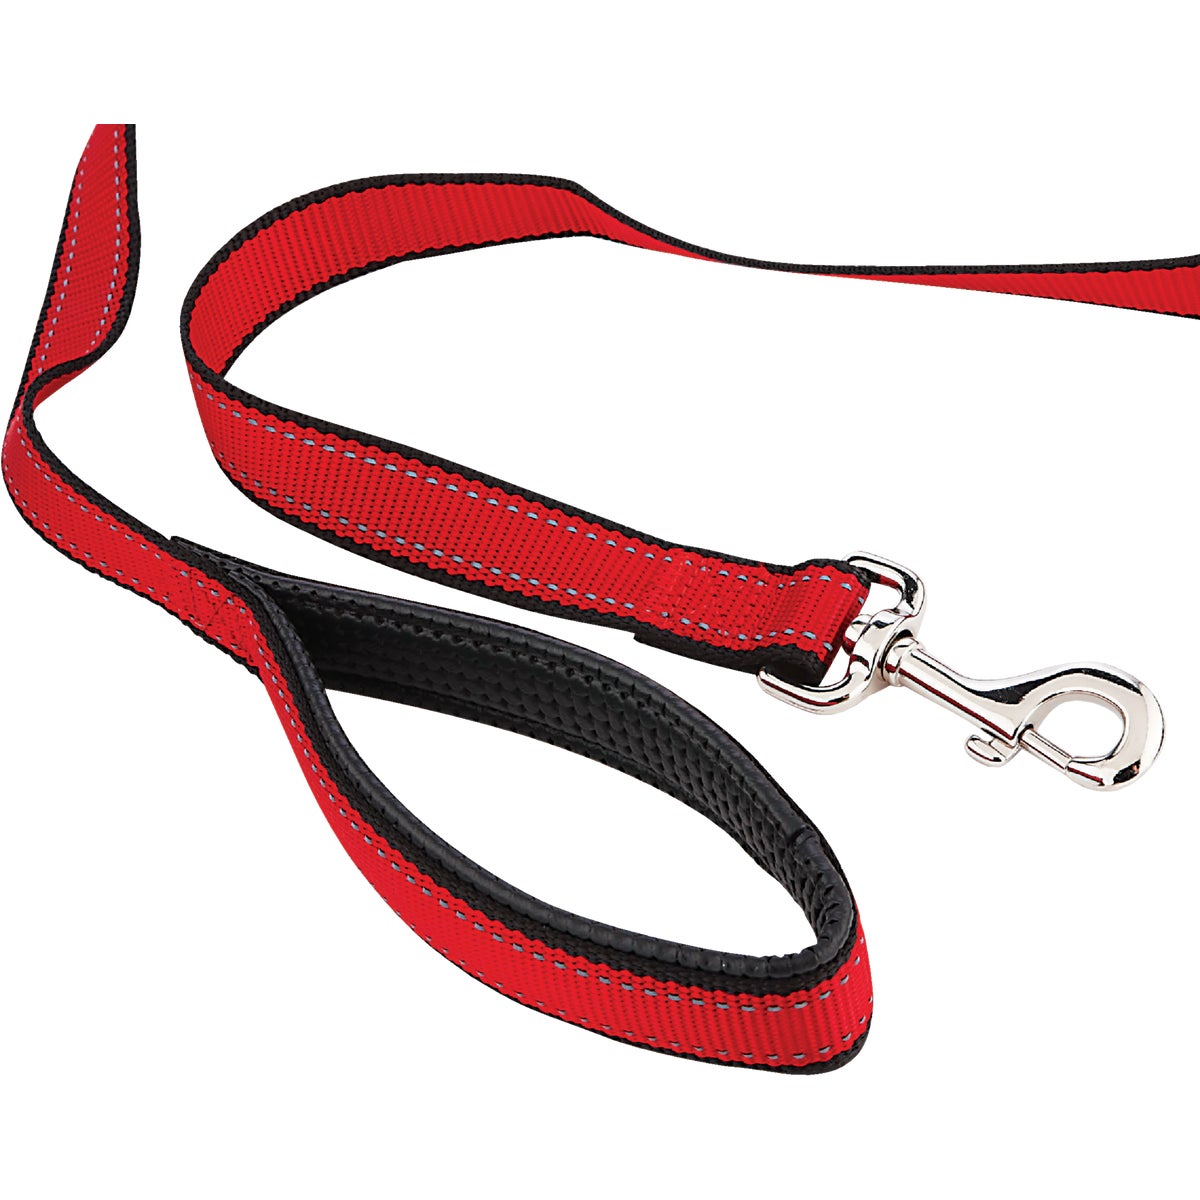 Item 817986, Reflective safety and high visibility leash.